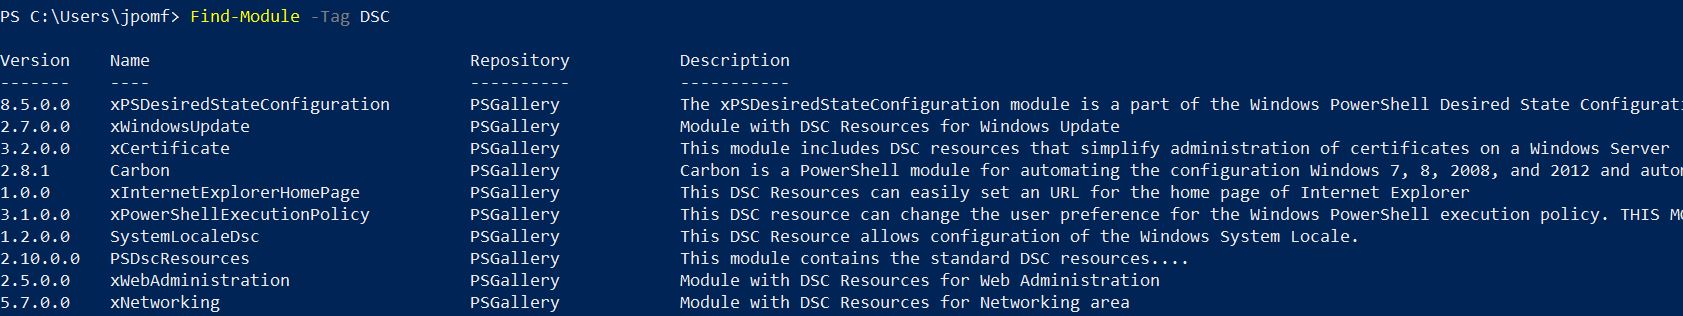 Find DSC resources on the PowerShell gallery